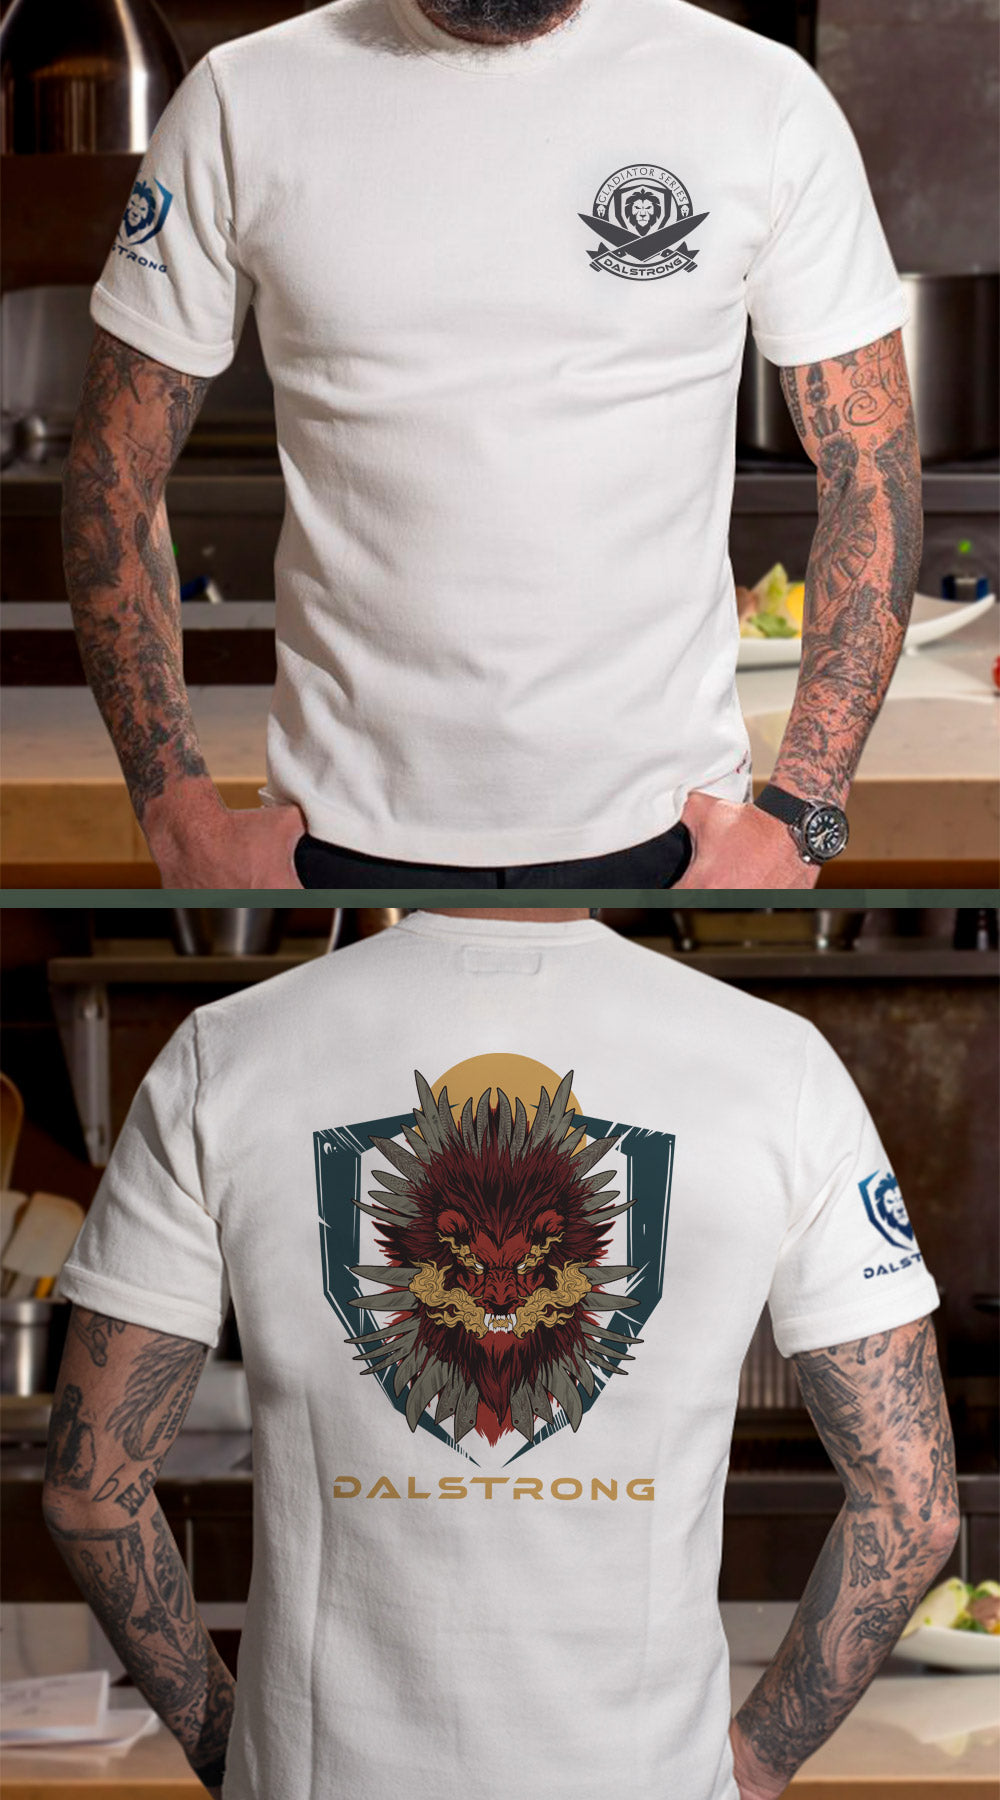 Armed To The Teeth Tee white front and back preview.